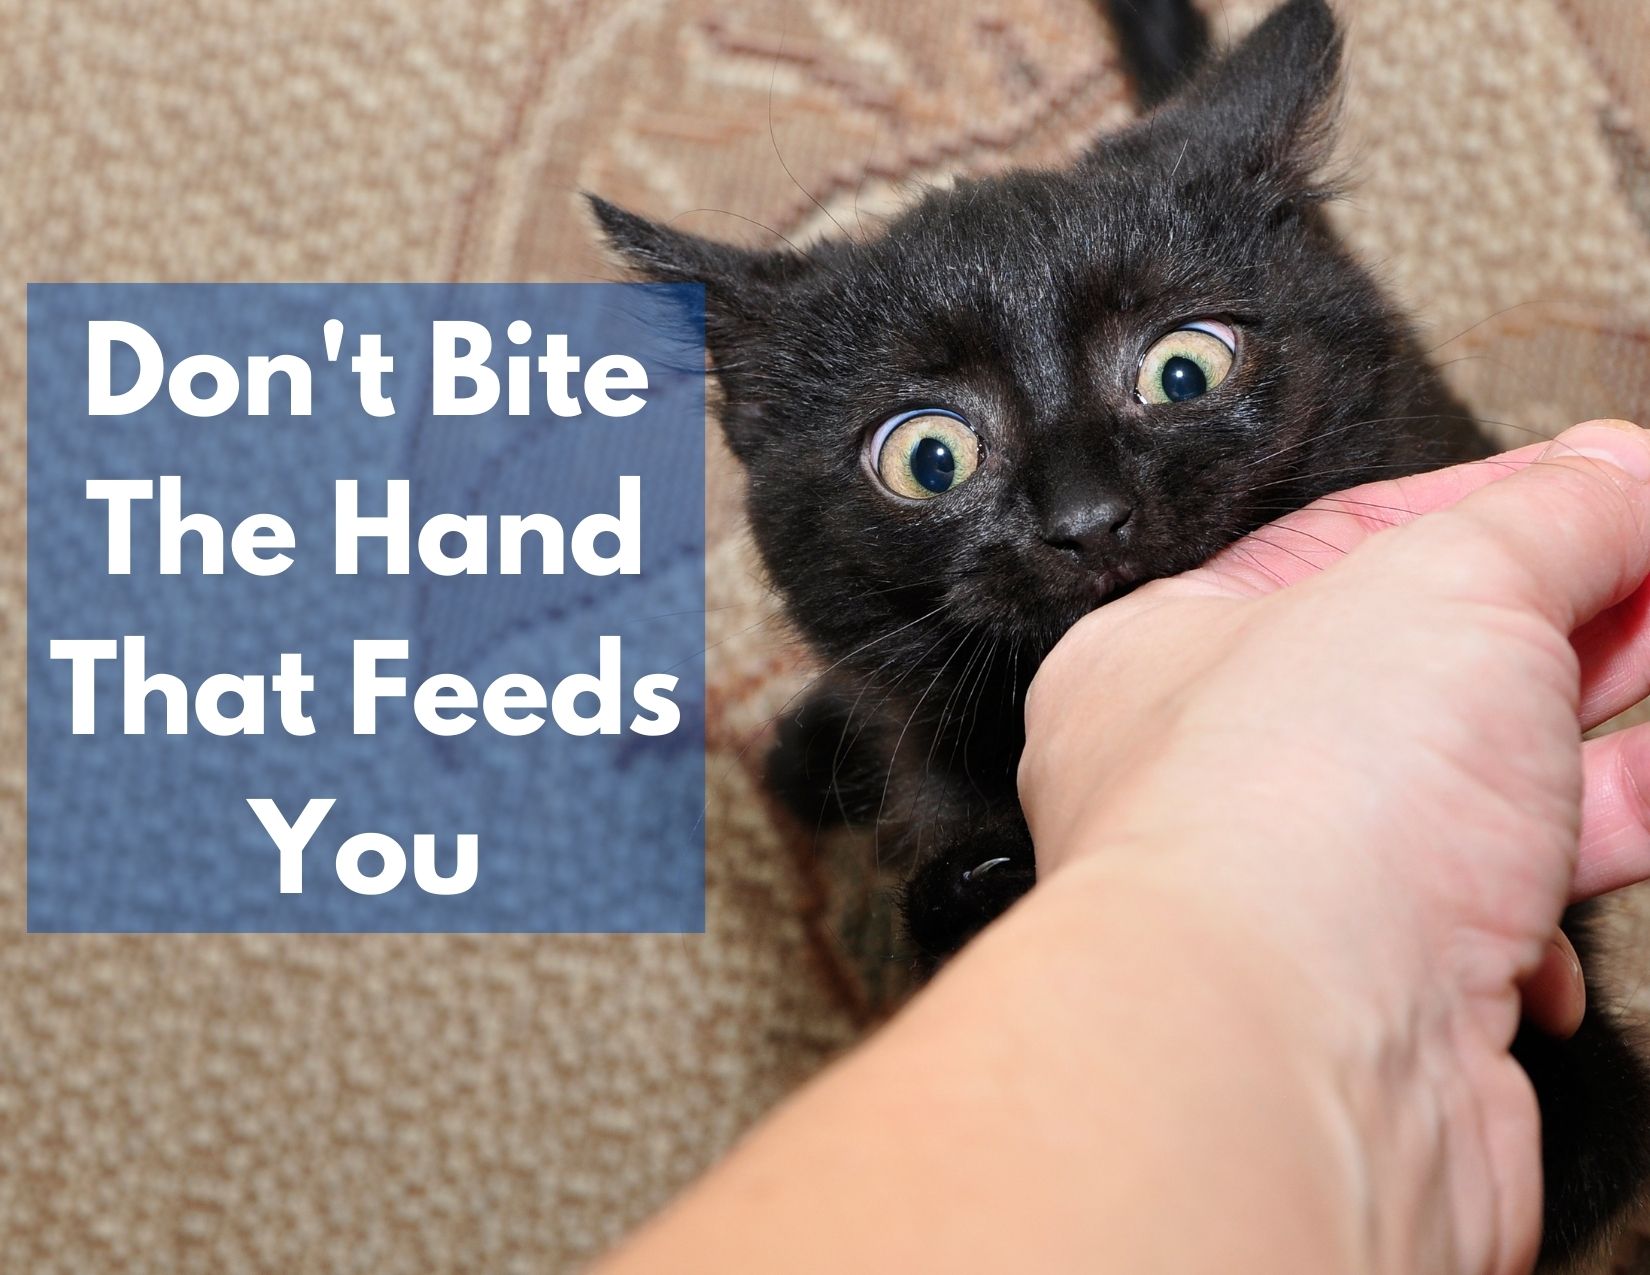 A picture of a cat biting a hand with the words "don't bite the hand that feeds you"